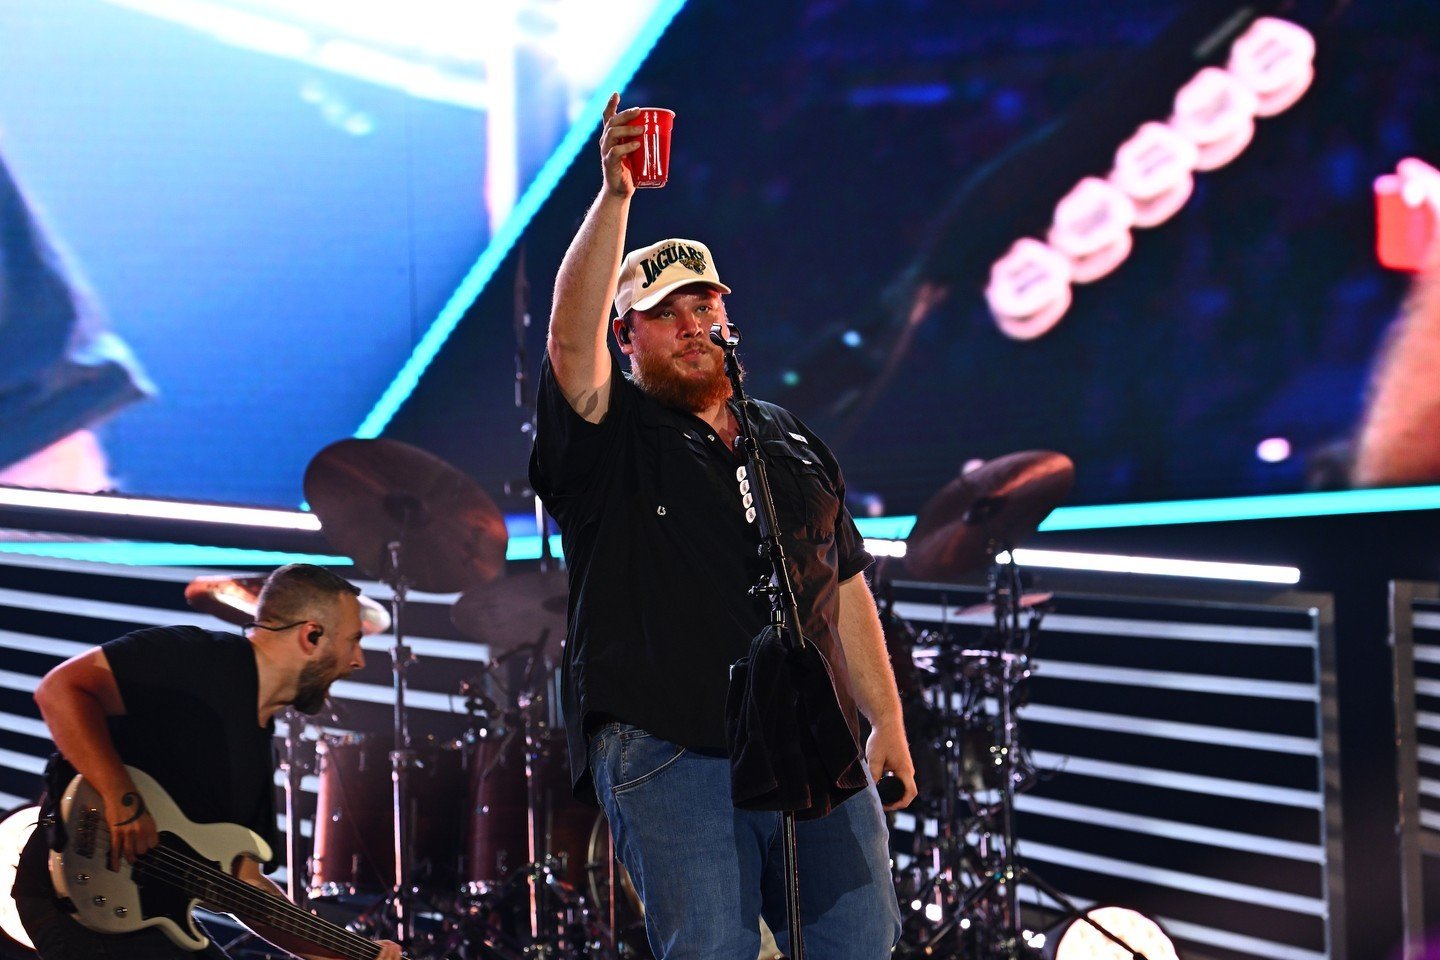 Cheers to an incredible first night of @LukeCombs at The Bank! Who's ready to run it back tomorrow night with 4 new opening acts + the Bootleggers Tailgate!

Don't have FOMO, get your tickets now at the link in our bio!

📸: Chris Condon